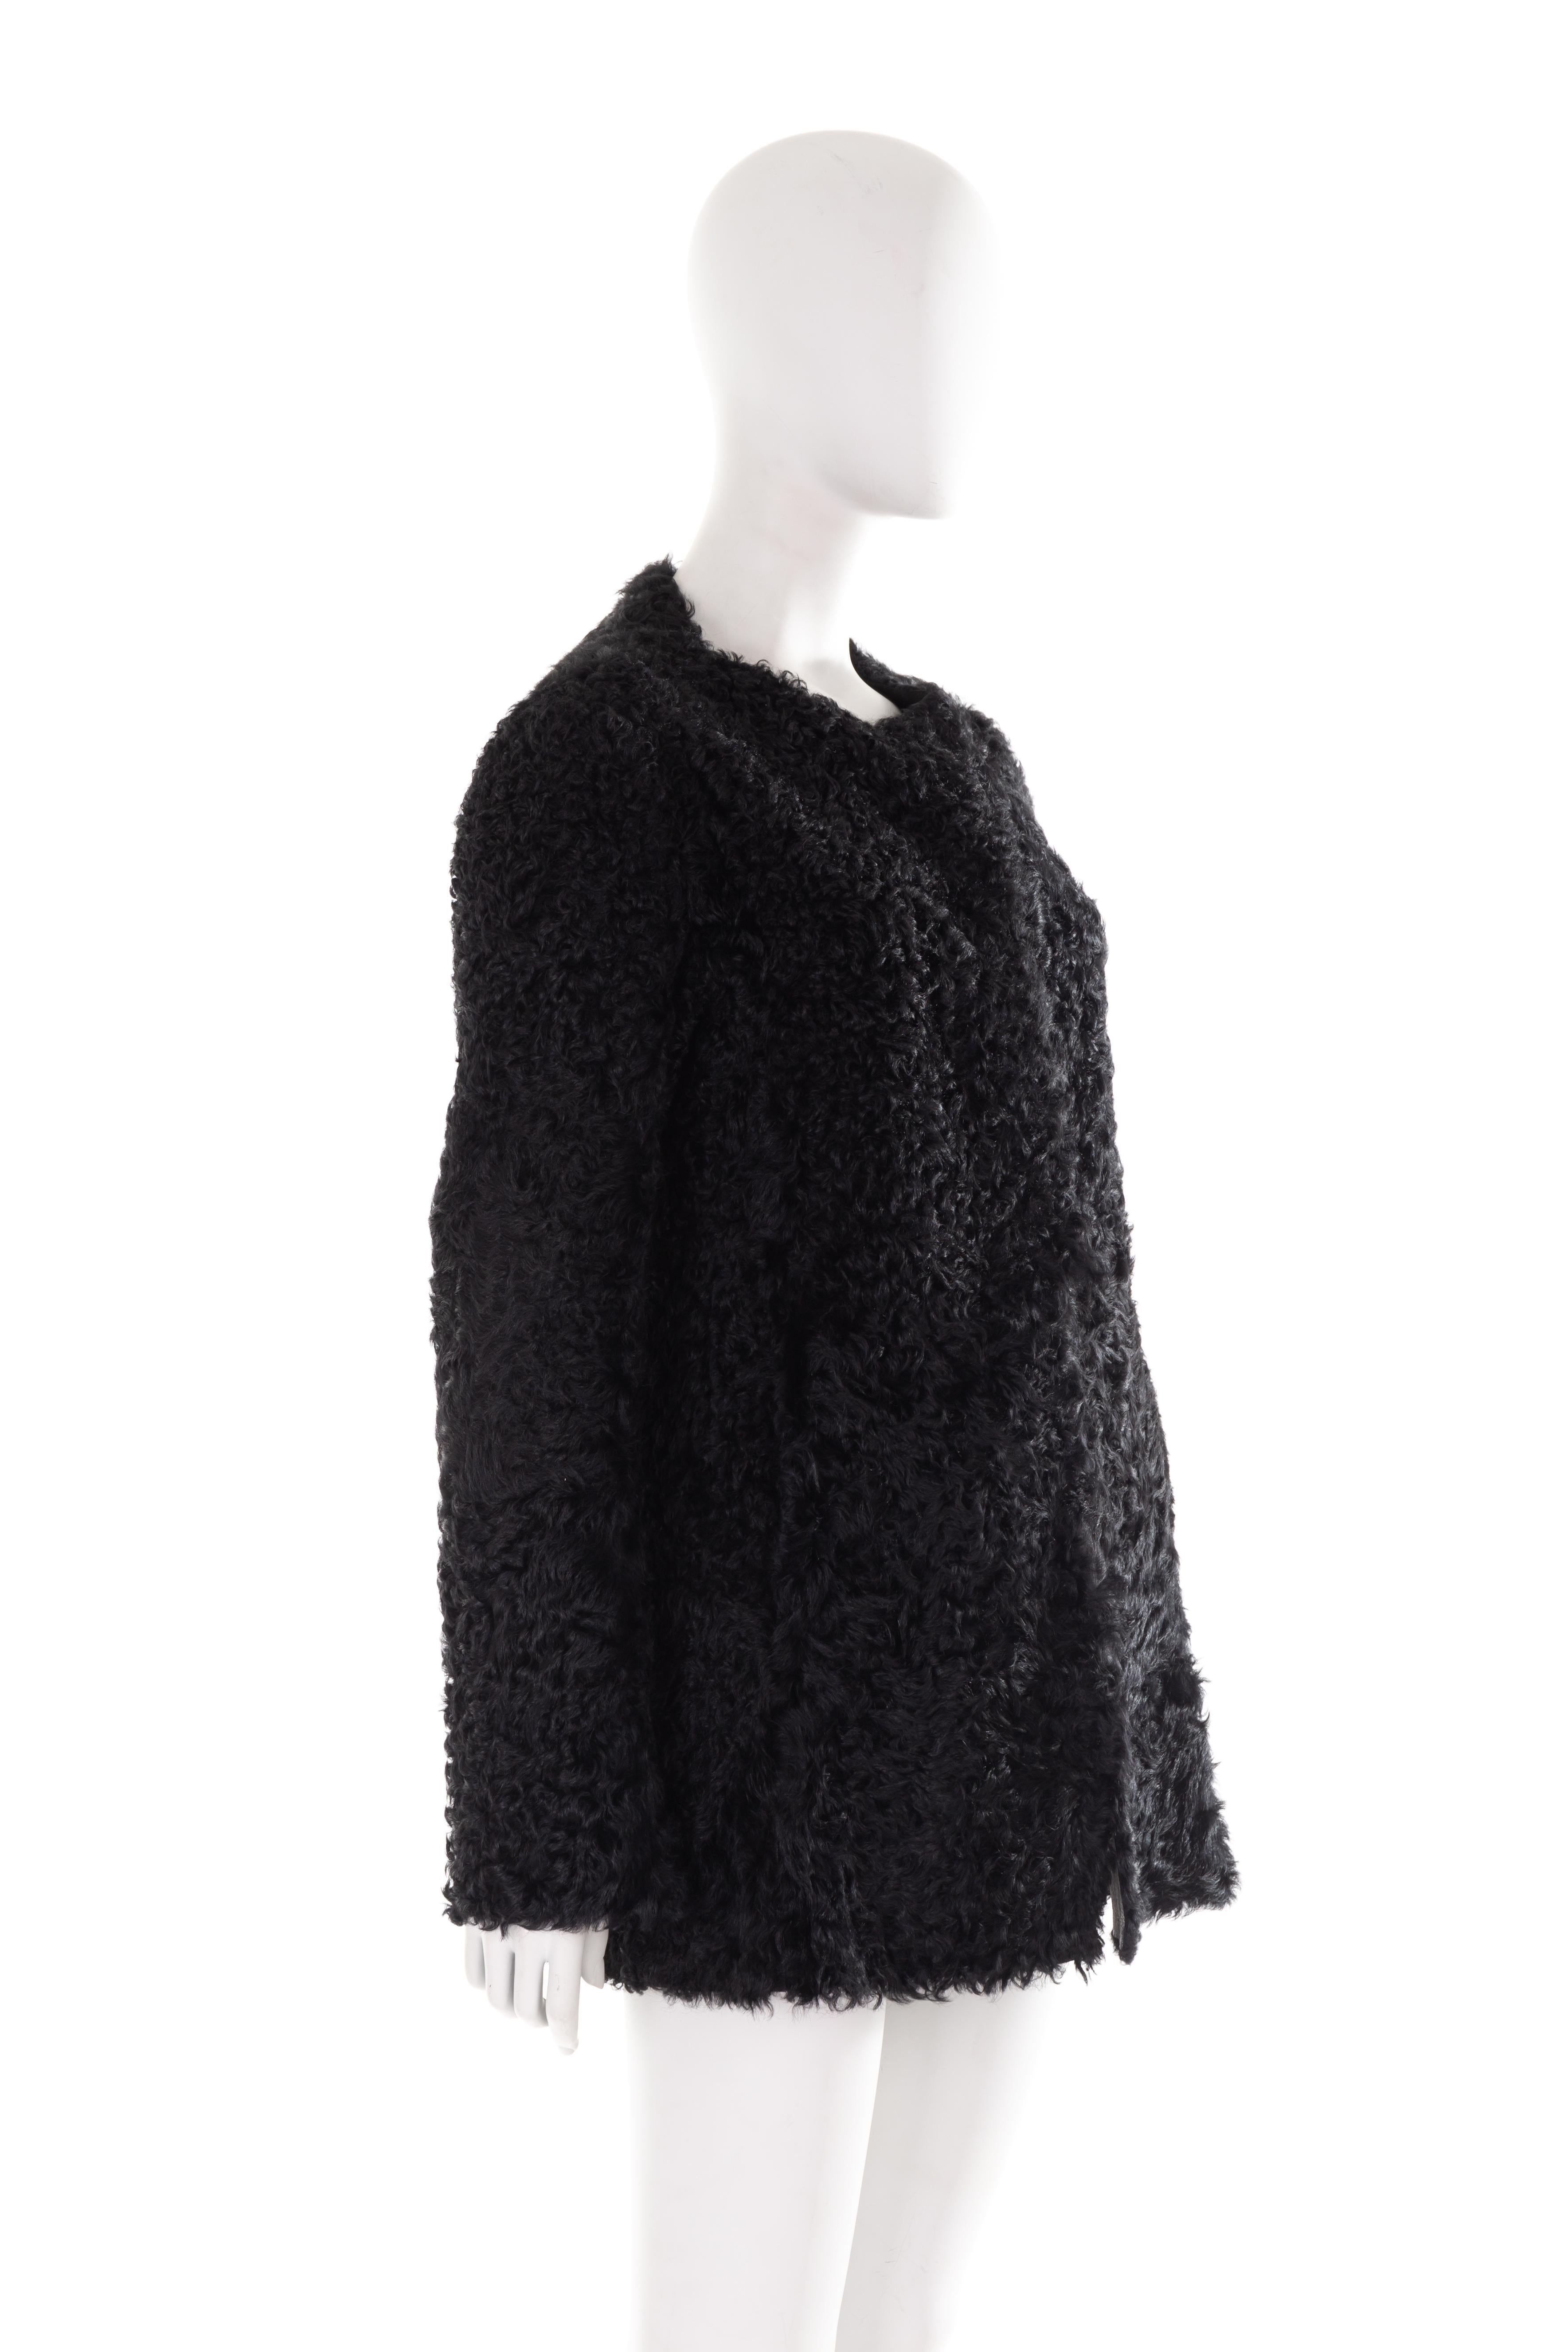 - Prada by Miuccia Prada
- Sold by Gold Palms Vintage
- Fall Winter 2011 collection
- Black curly Mongolian lamb fur coat
- Round neck
- Long sleeves
- Welt side pockets
- Black patent leather lining
- Size: IT 42

Shoulder to shoulder: 44 cm/ 17,3